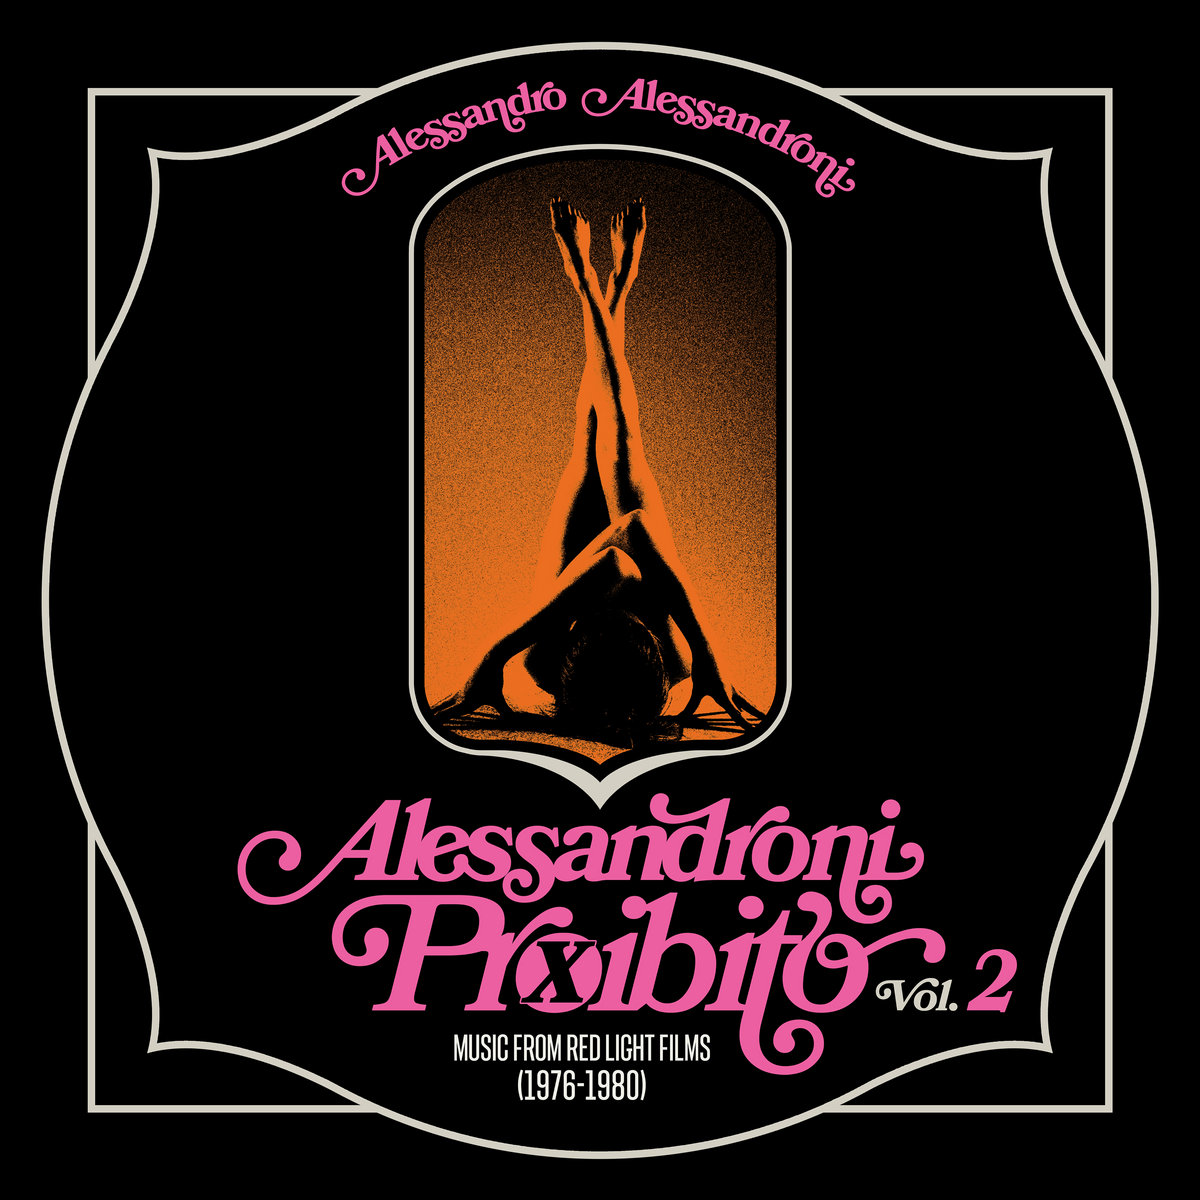 Alessandro Alessandroni – Alessandroni Proibito Vol​.​2 (Music from Red Light Films 1976​-​1980)